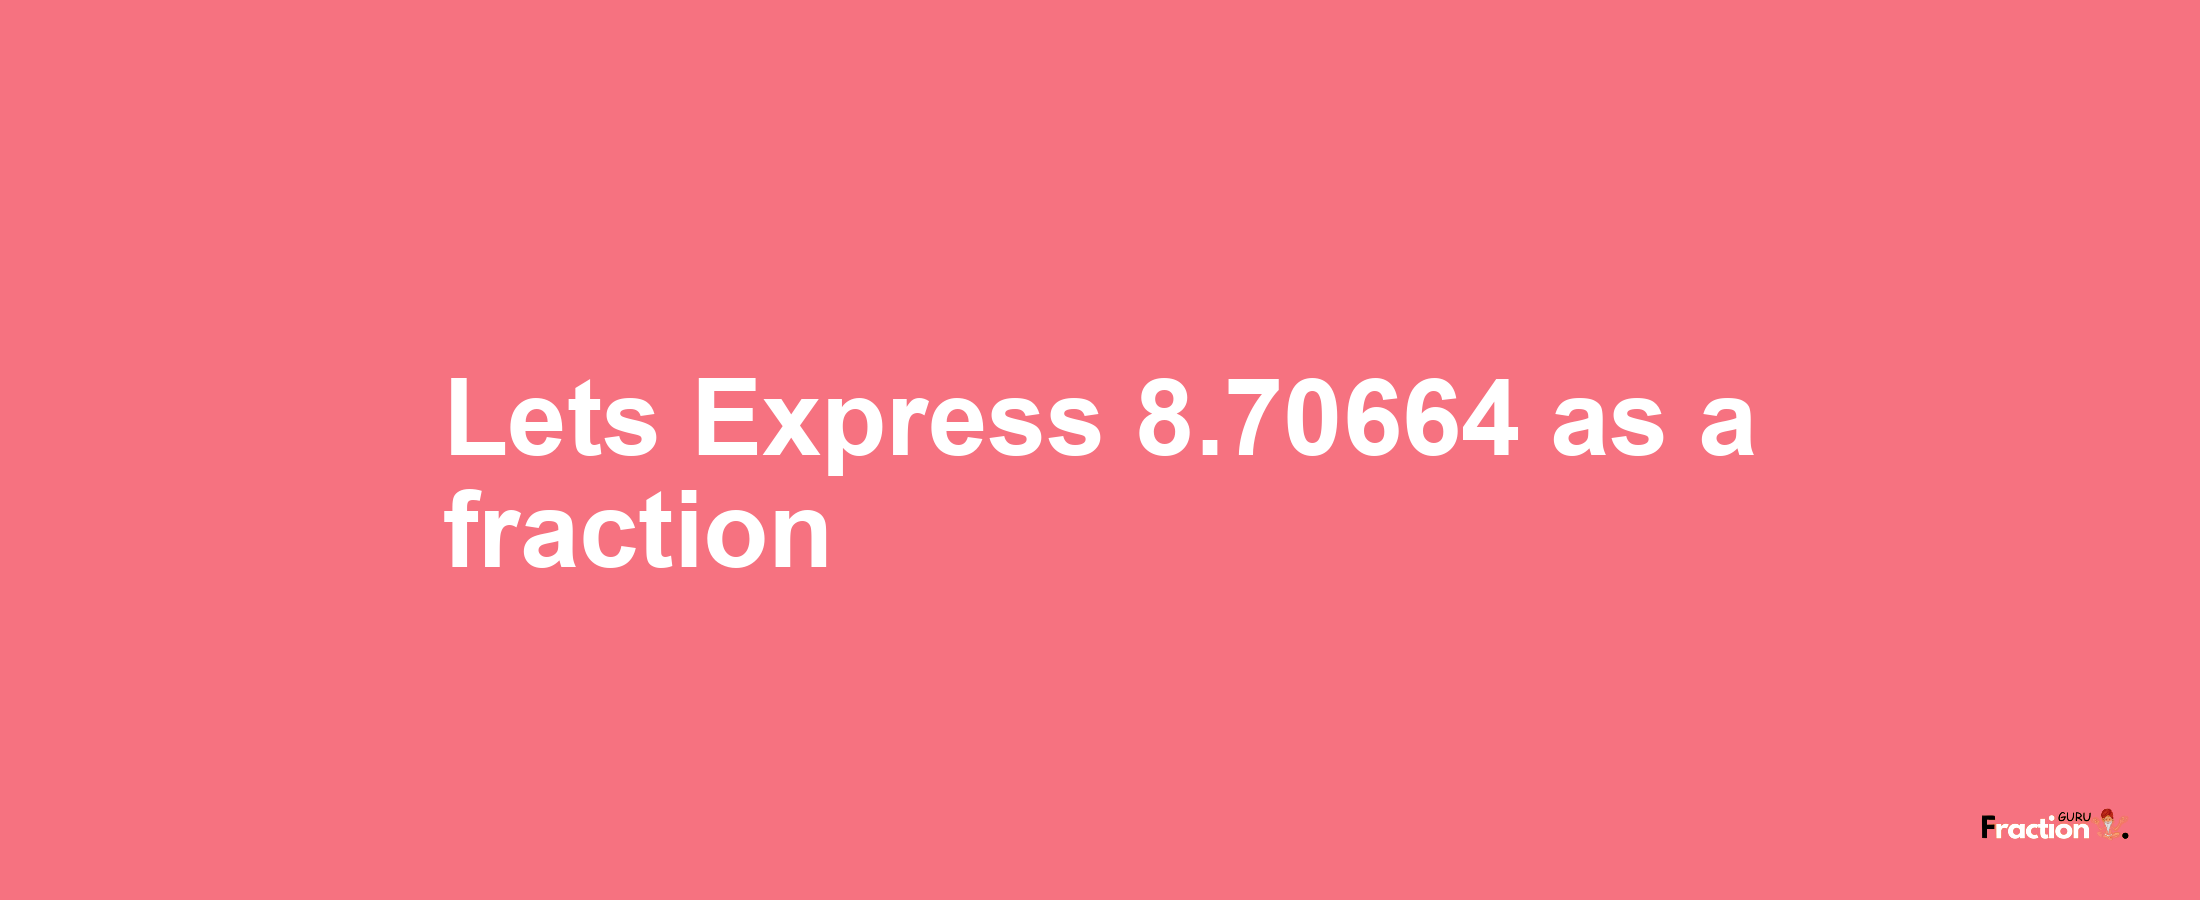 Lets Express 8.70664 as afraction